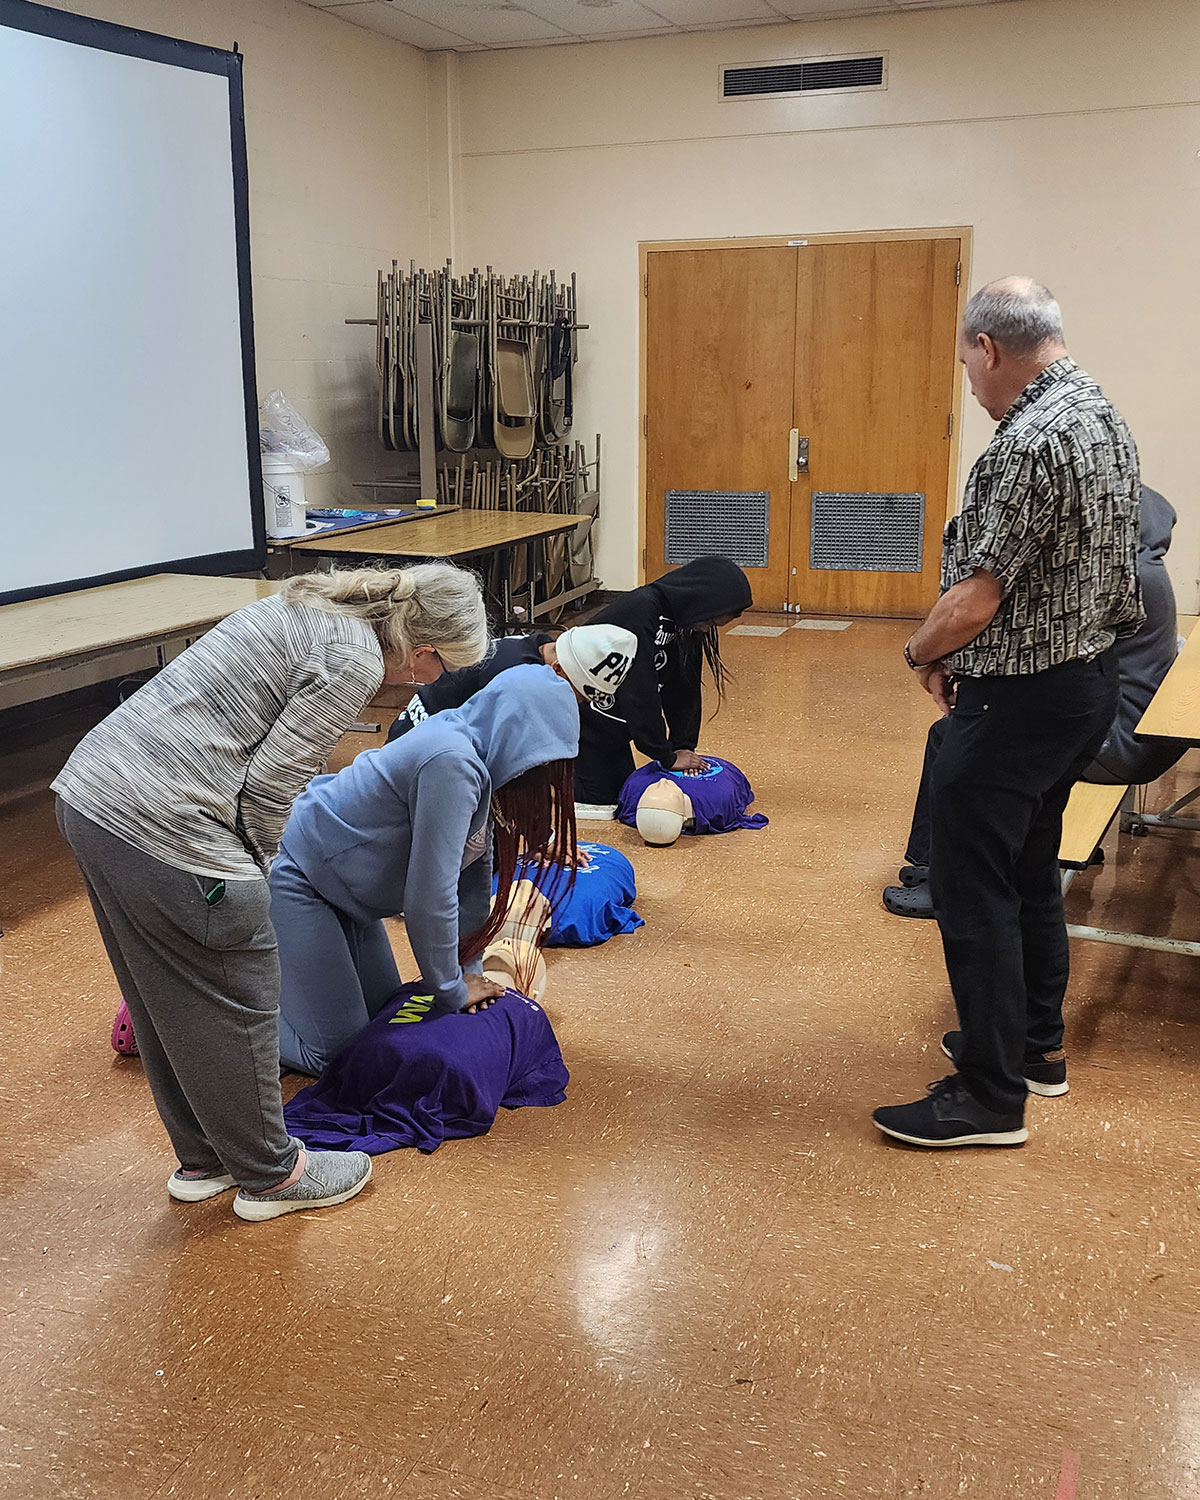 CPR training at Audubon MS in LA sponsored by Bessie Morris Foundation